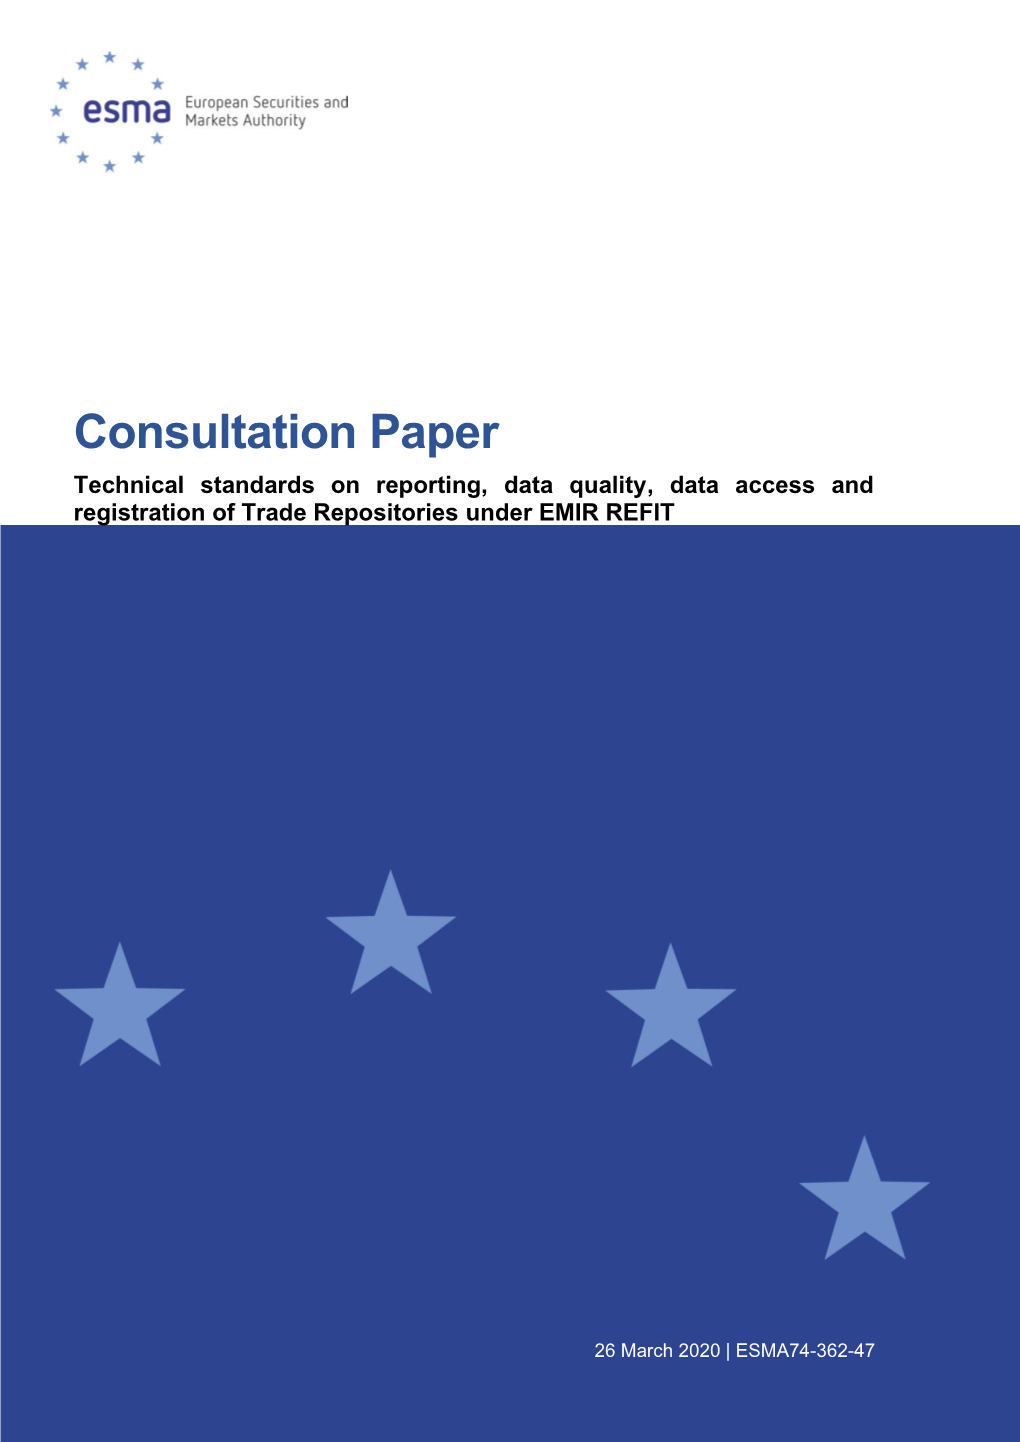 Consultation Paper Technical Standards on Reporting, Data Quality, Data Access and Registration of Trade Repositories Under EMIR REFIT